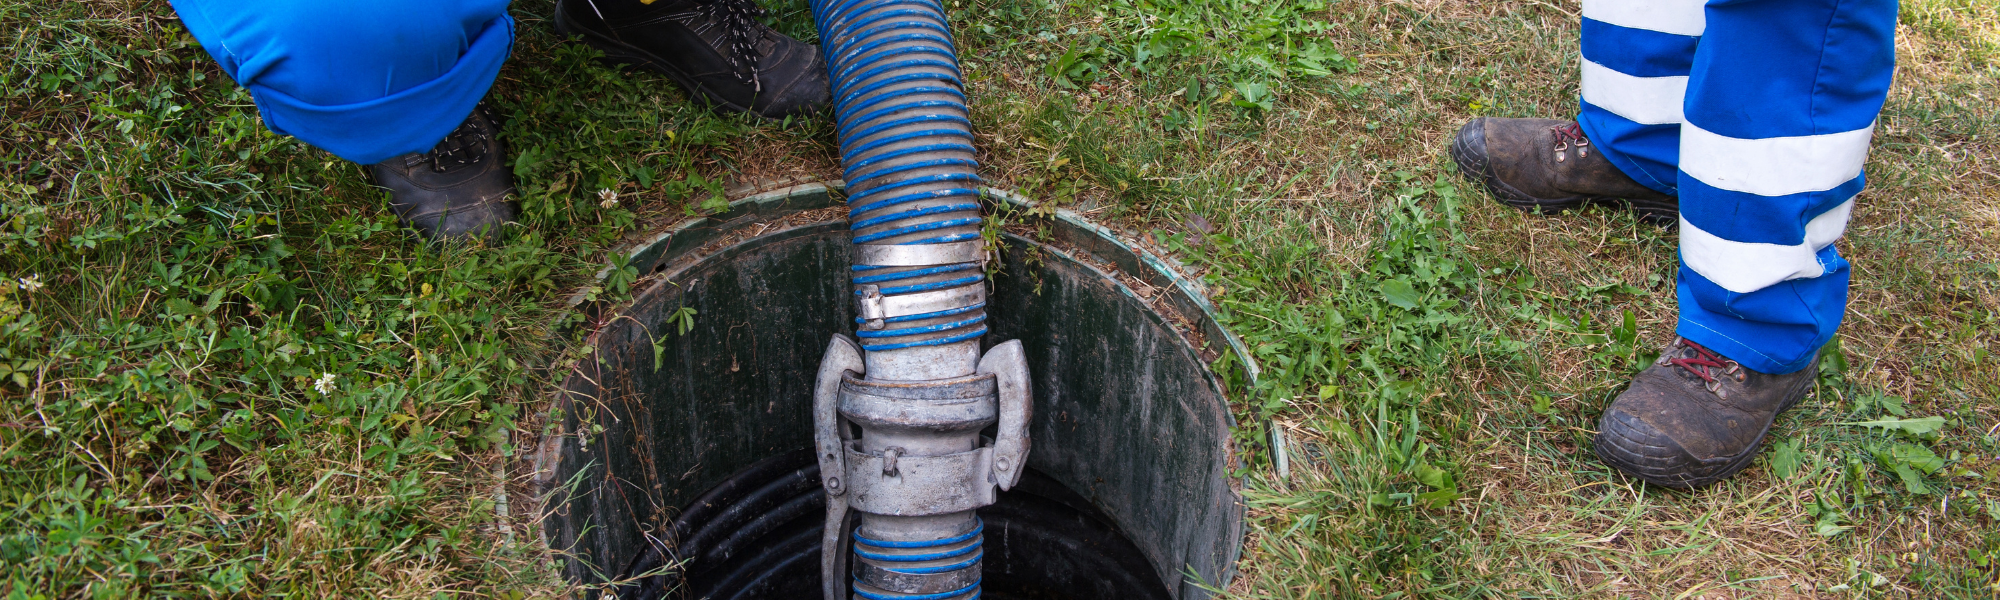 Guy Cleaning out Septic Tank with Hose